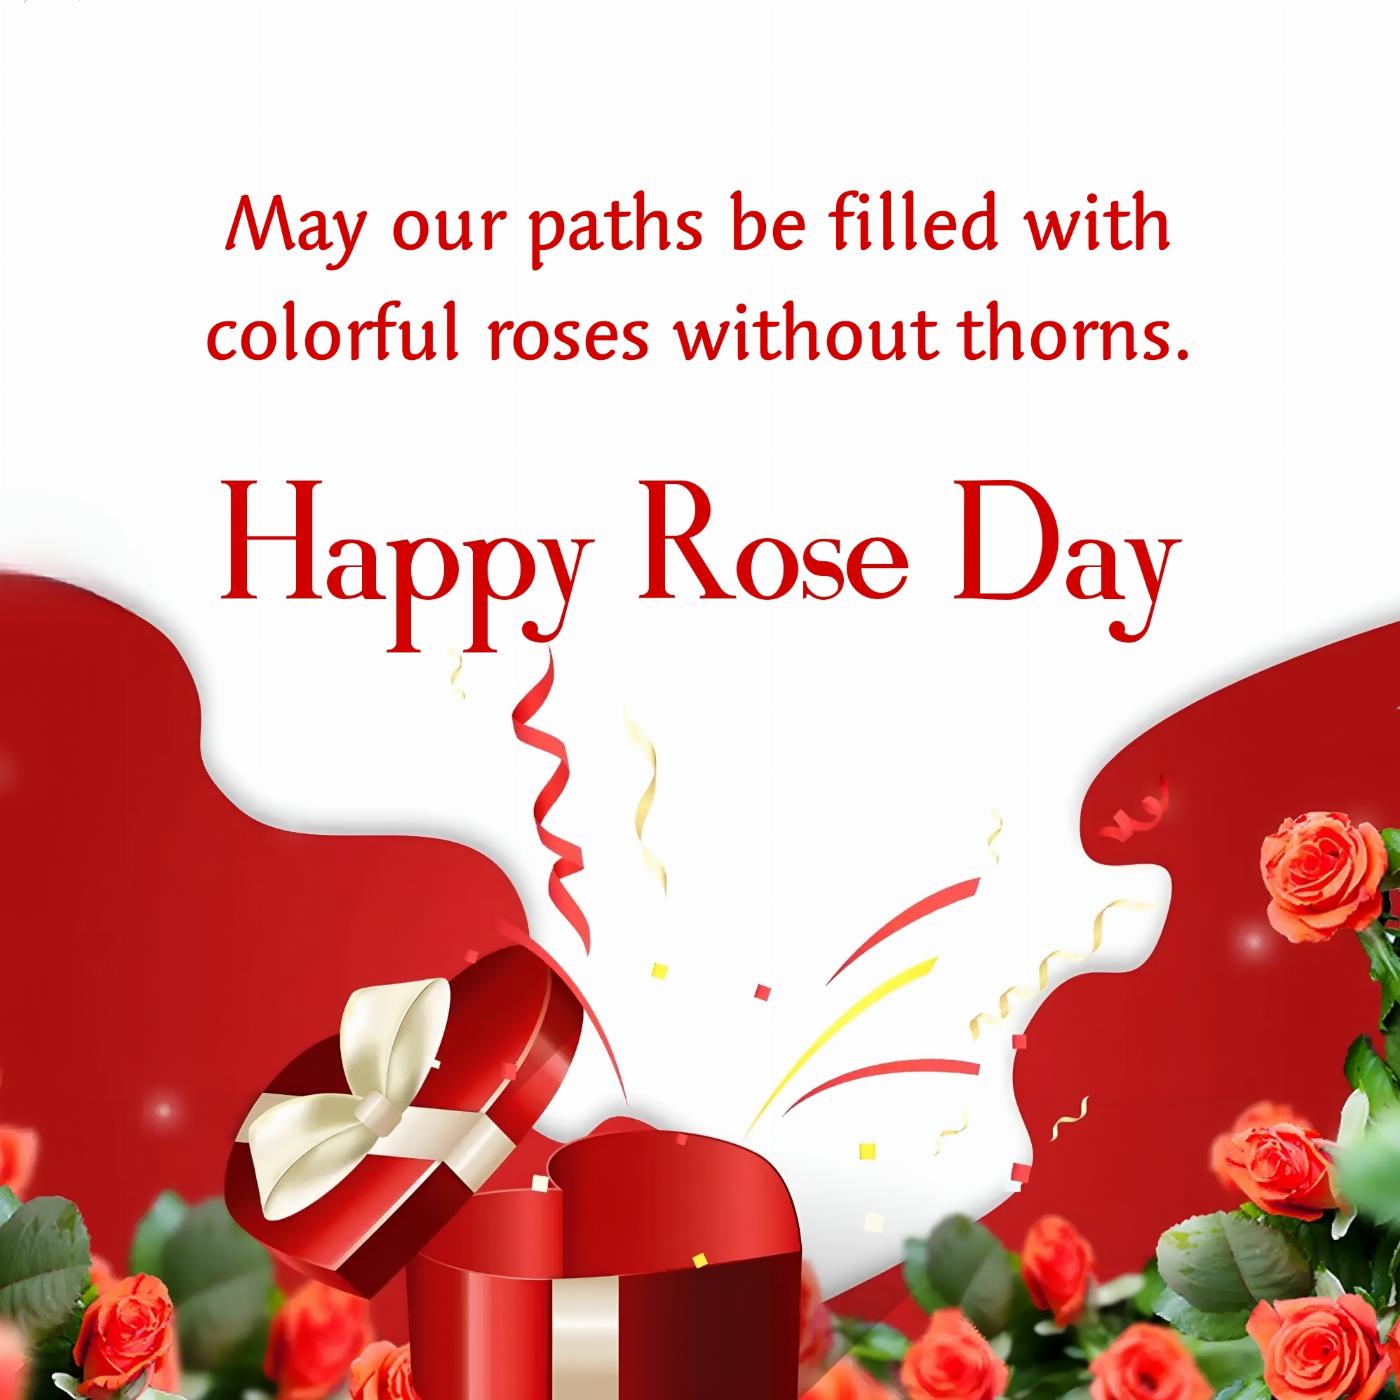 May our paths be filled with colorful roses without thorns